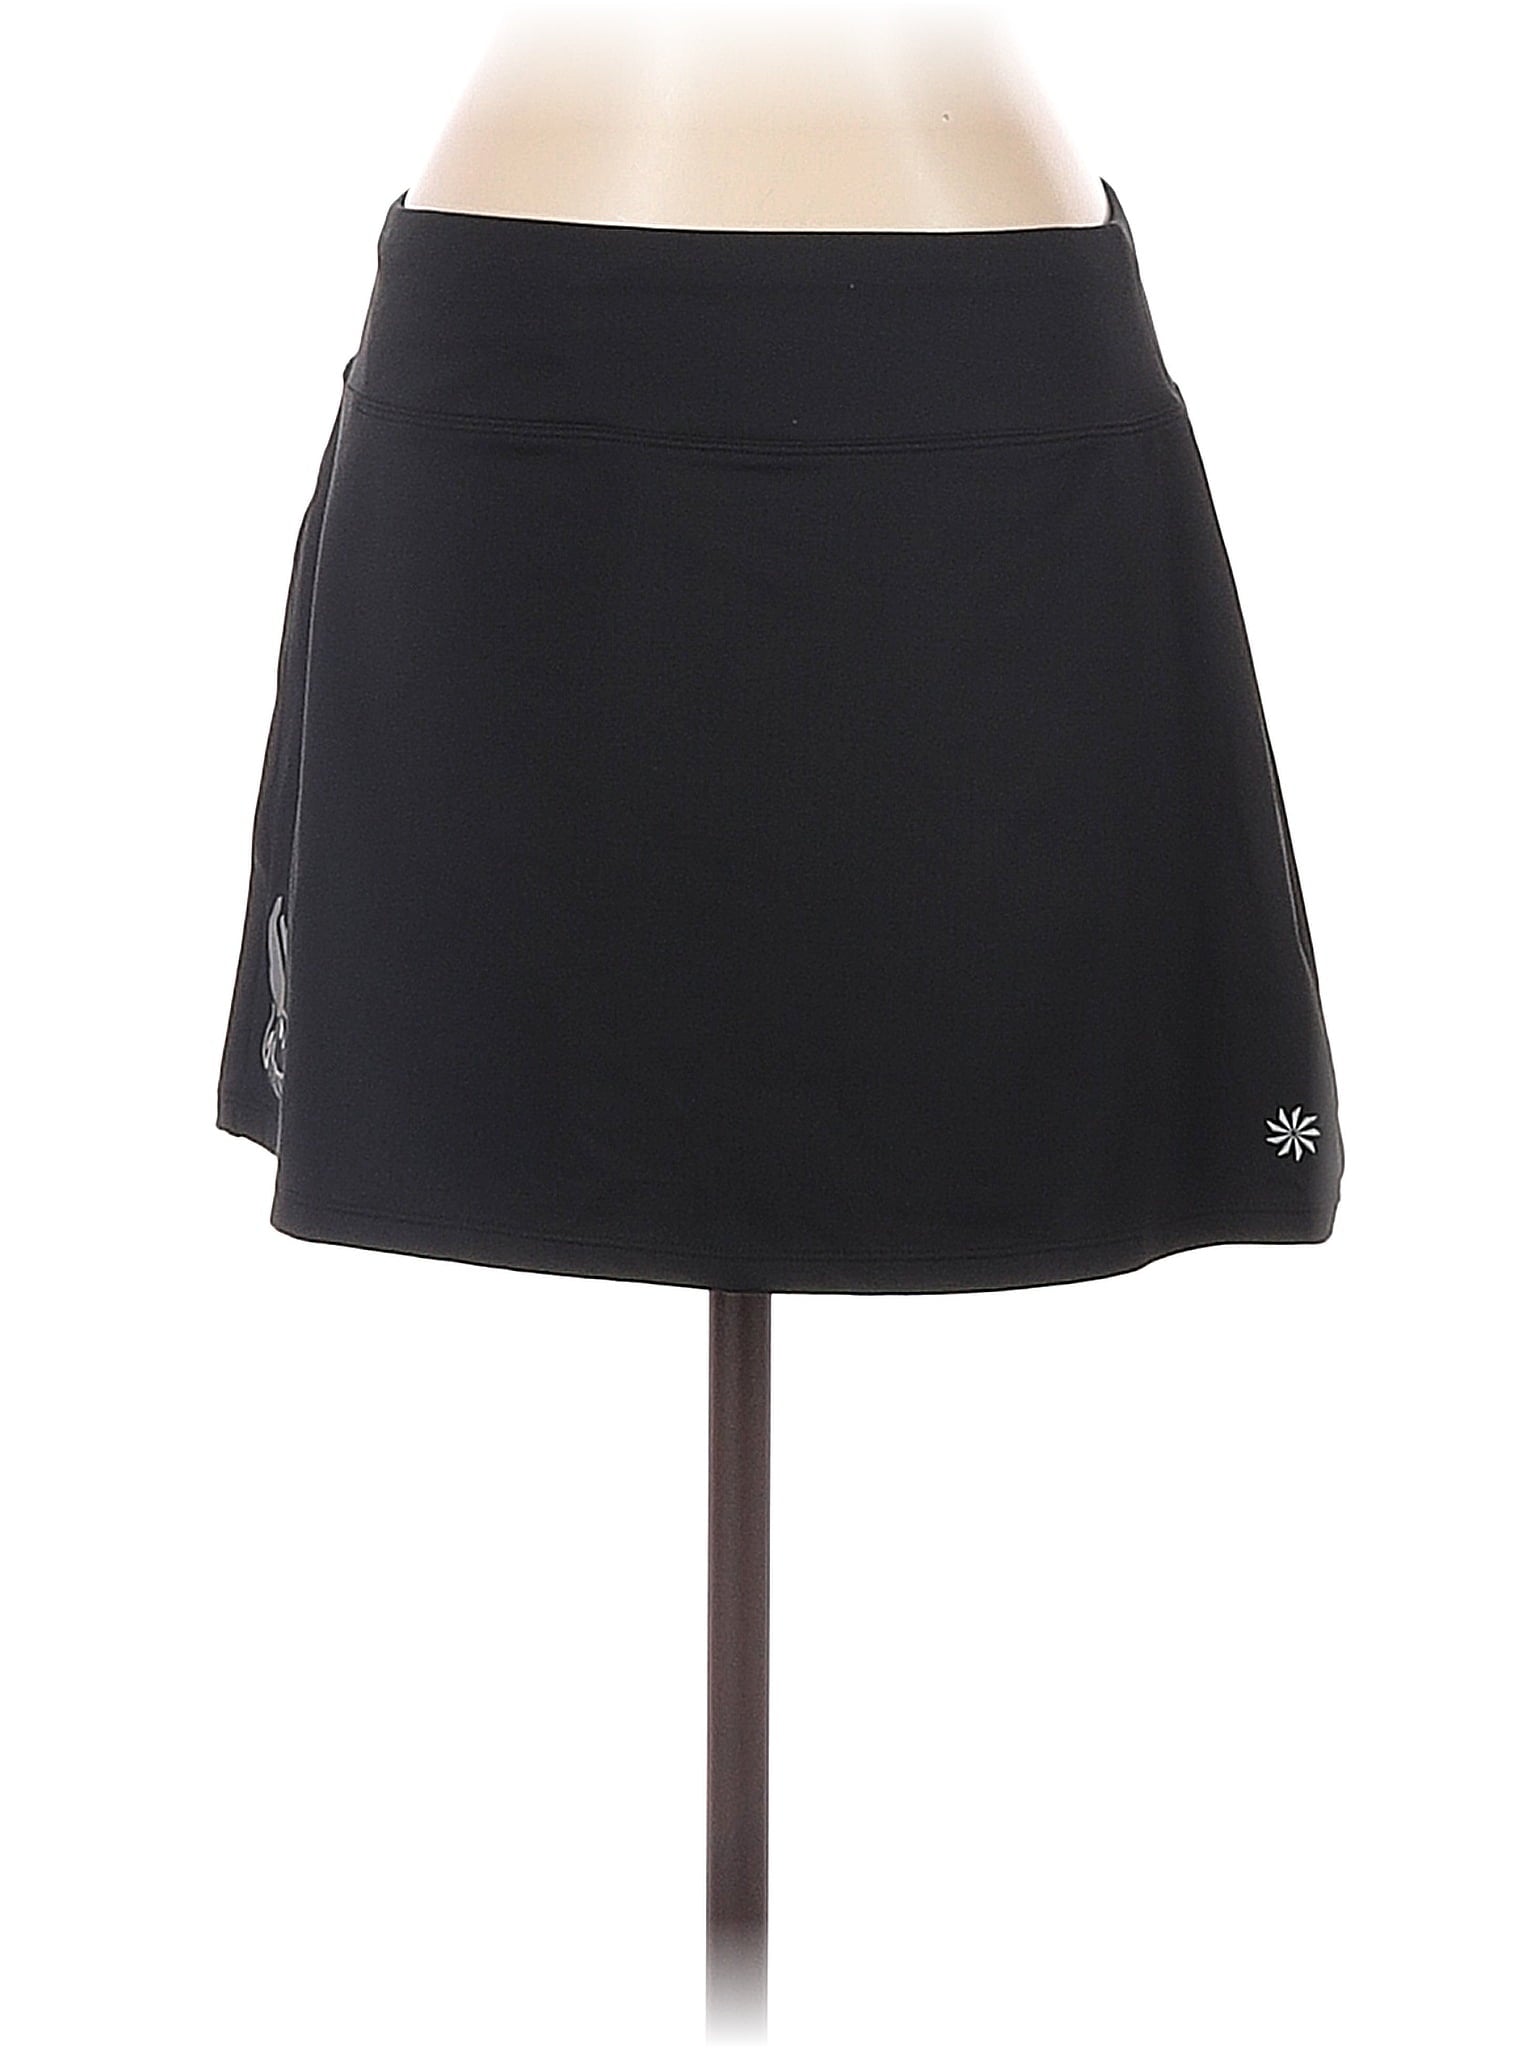 Active Skirt size - S